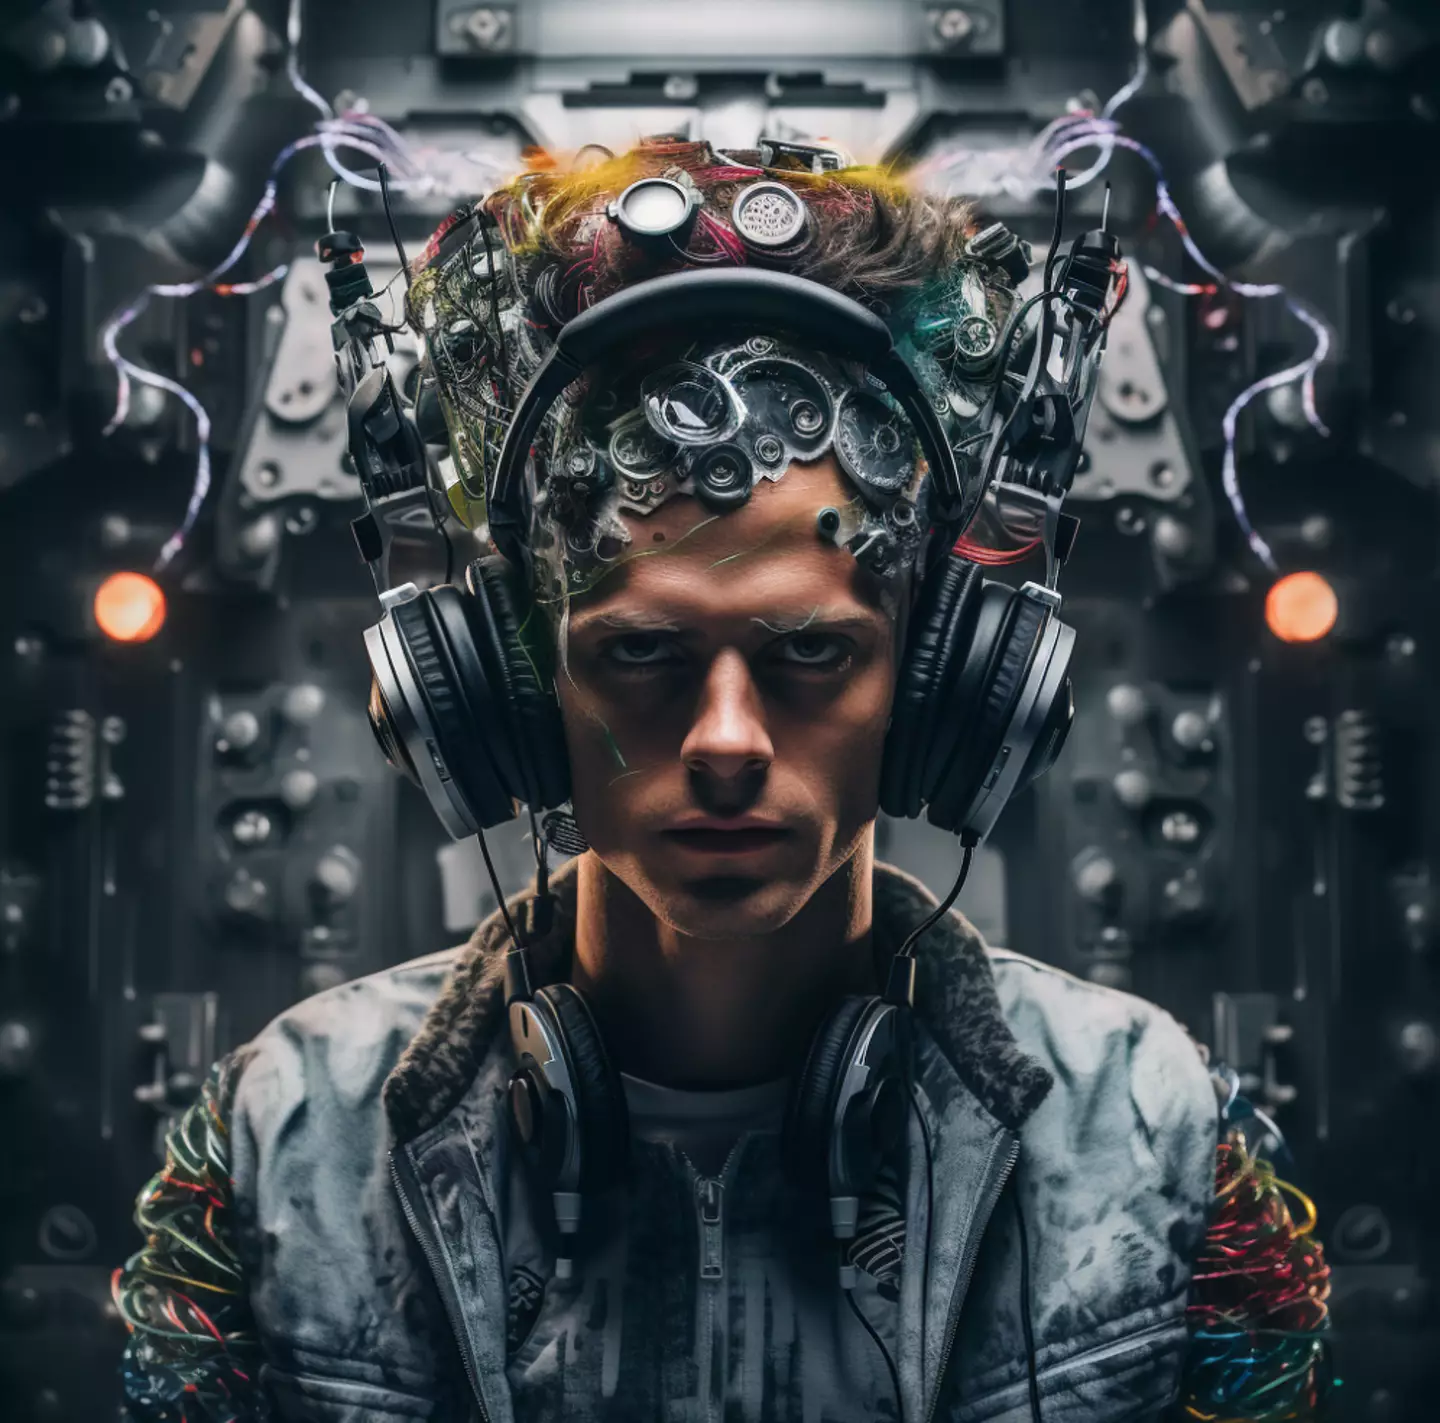 Yes, the average techno fan is wearing two sets of headphones and has become more machine than man.